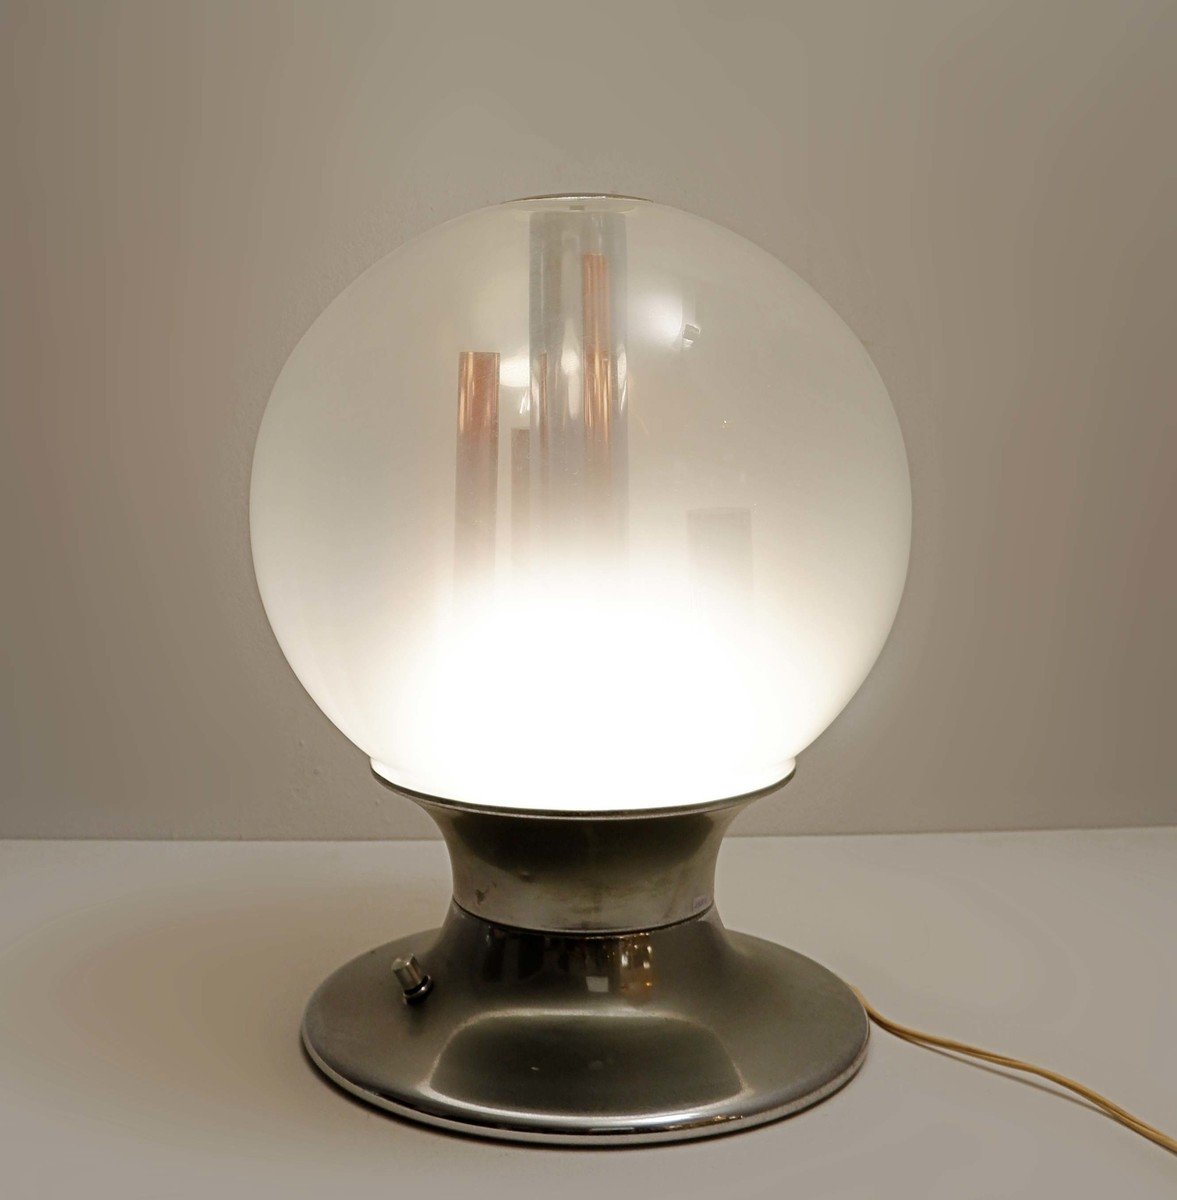 Murano Glass Globe And Copper Table By Angelo Brotto 1960s Table Lamp